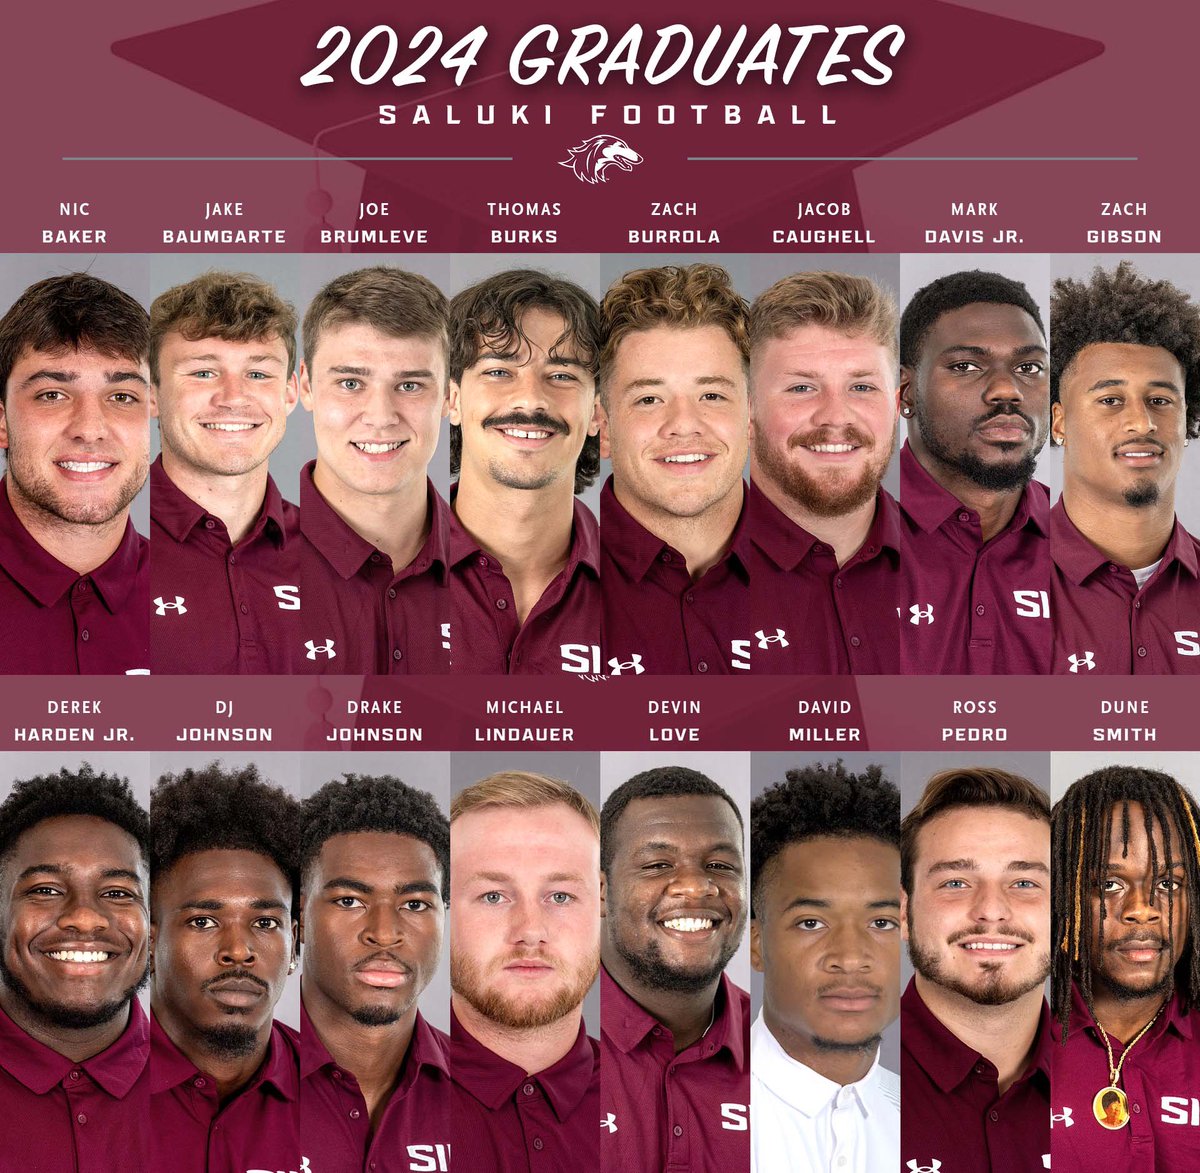 So proud of these SIXTEEN student-athletes who will receive undergraduate or graduate degrees this weekend! #Salukis | #RunWithUs